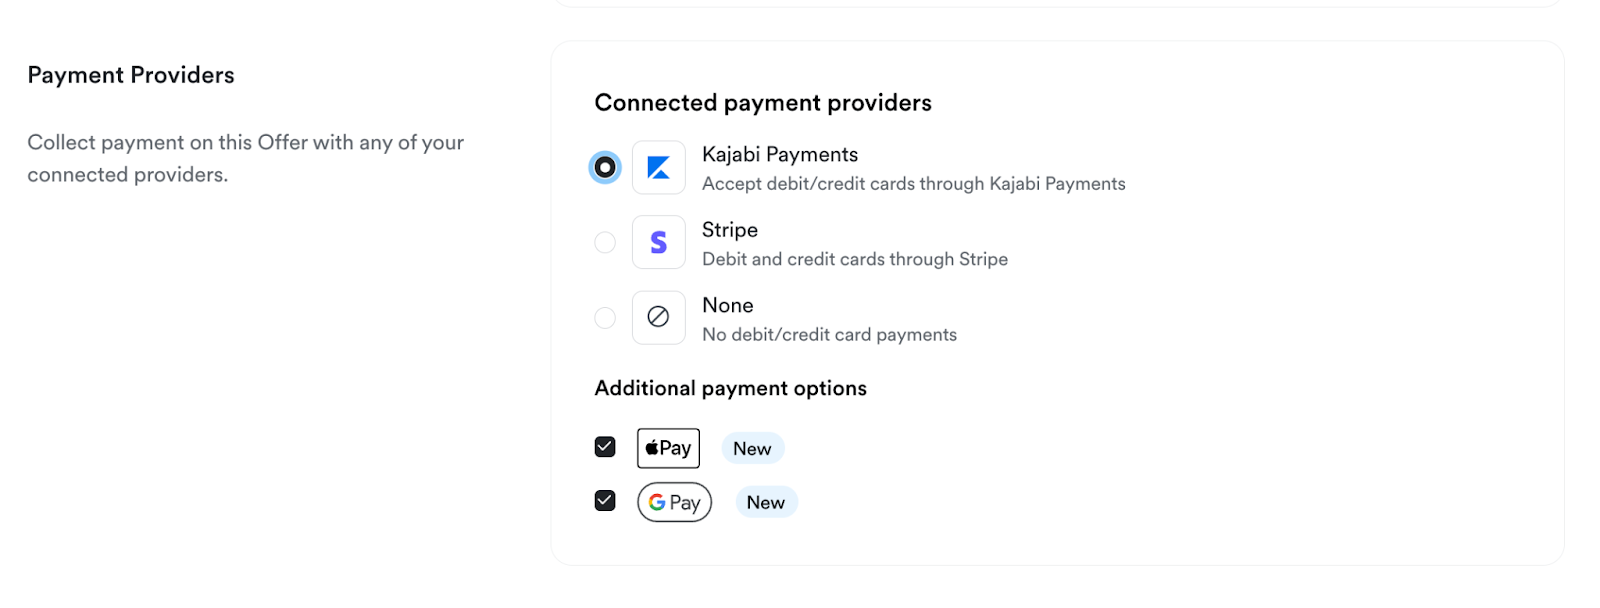 how-to-enable-apple-pay-on-kajabi-payments-offers-hc-draft-google-docs-1.png